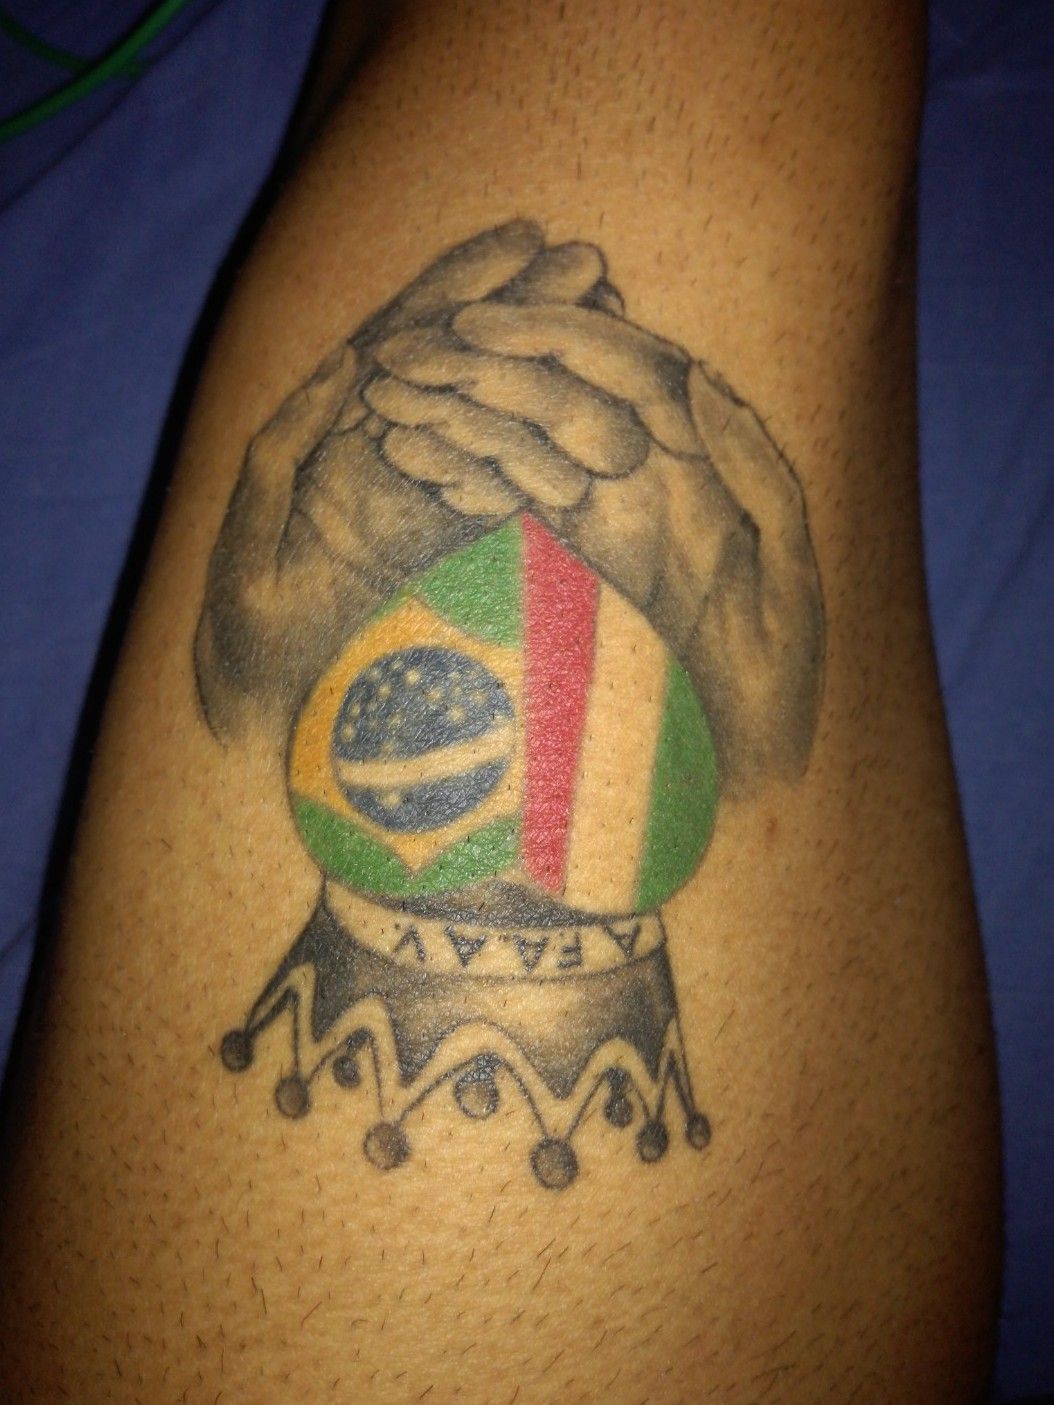 Dragon Rays Tattoo  Rasta Lion covering up an old Brazil flag Added it  back in the dreads  Facebook